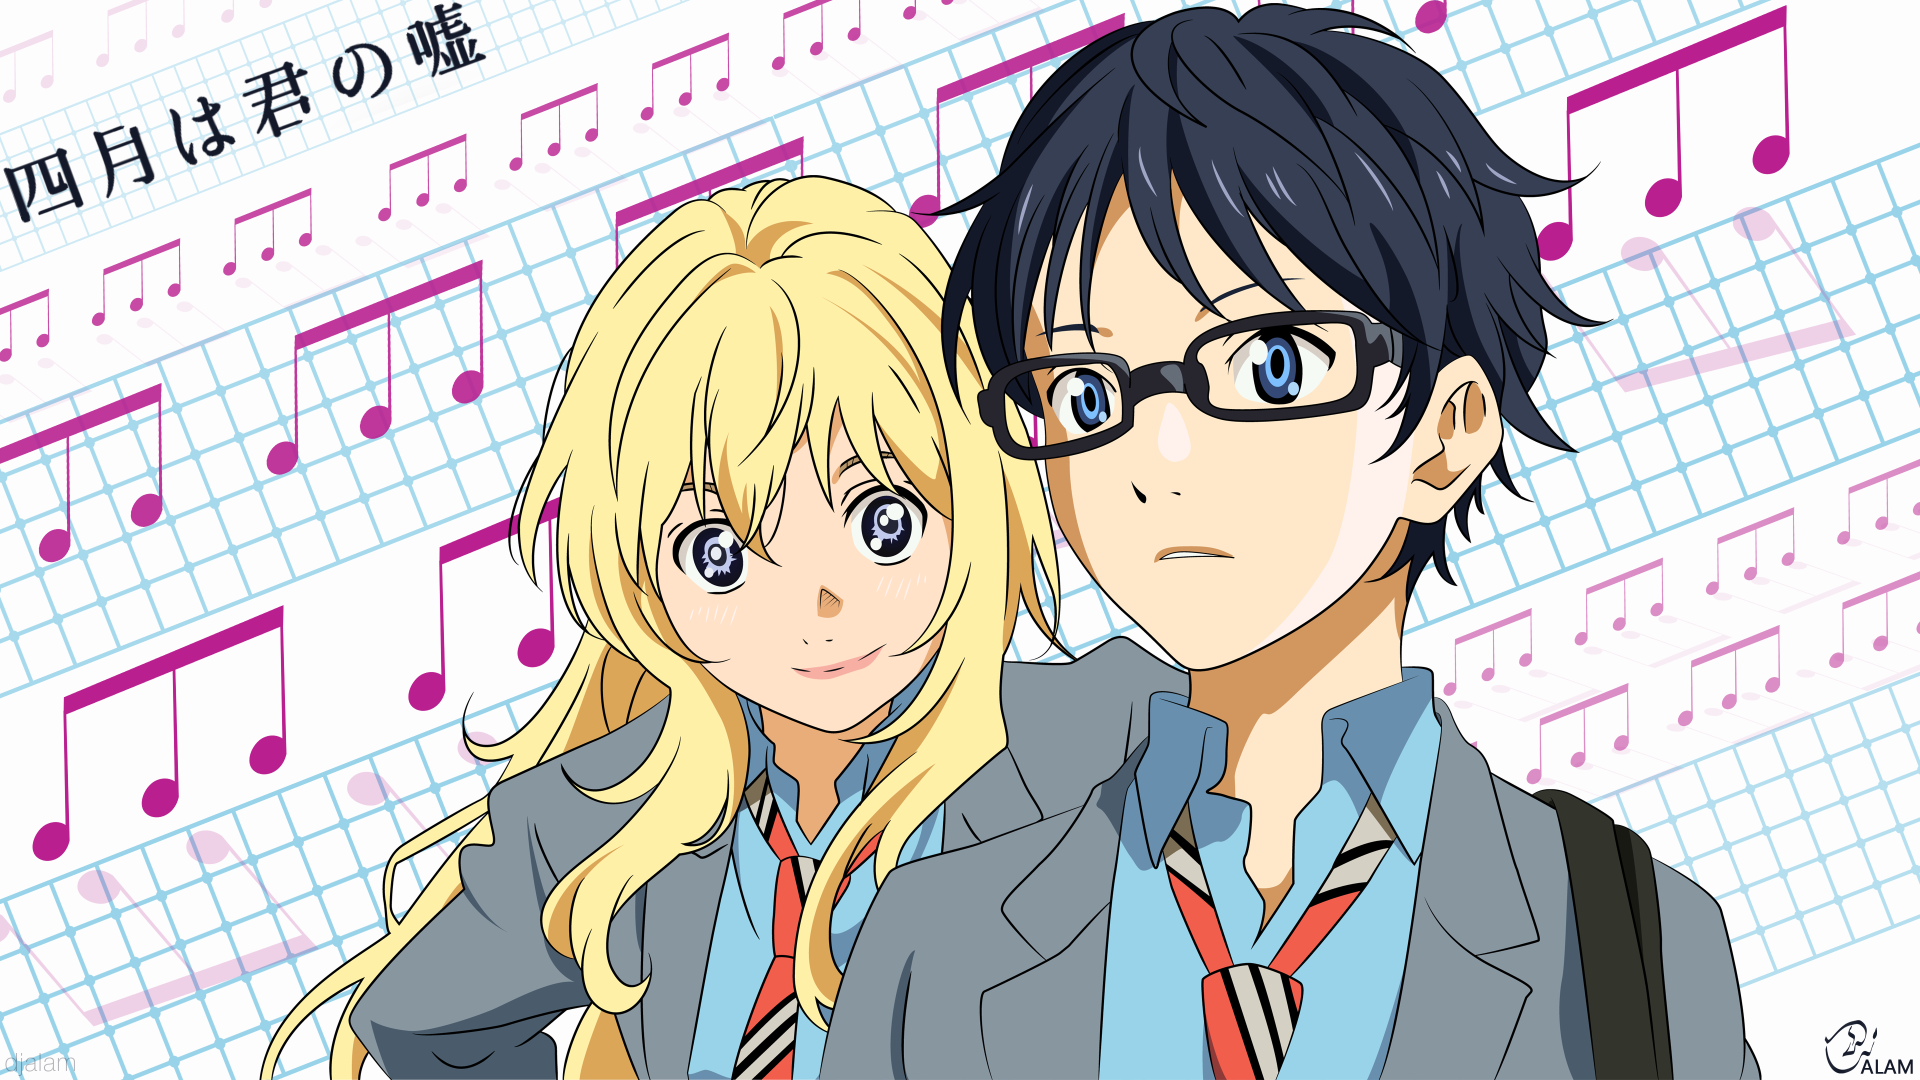 Anime Your Lie in April 4k Ultra HD Wallpaper by Alam